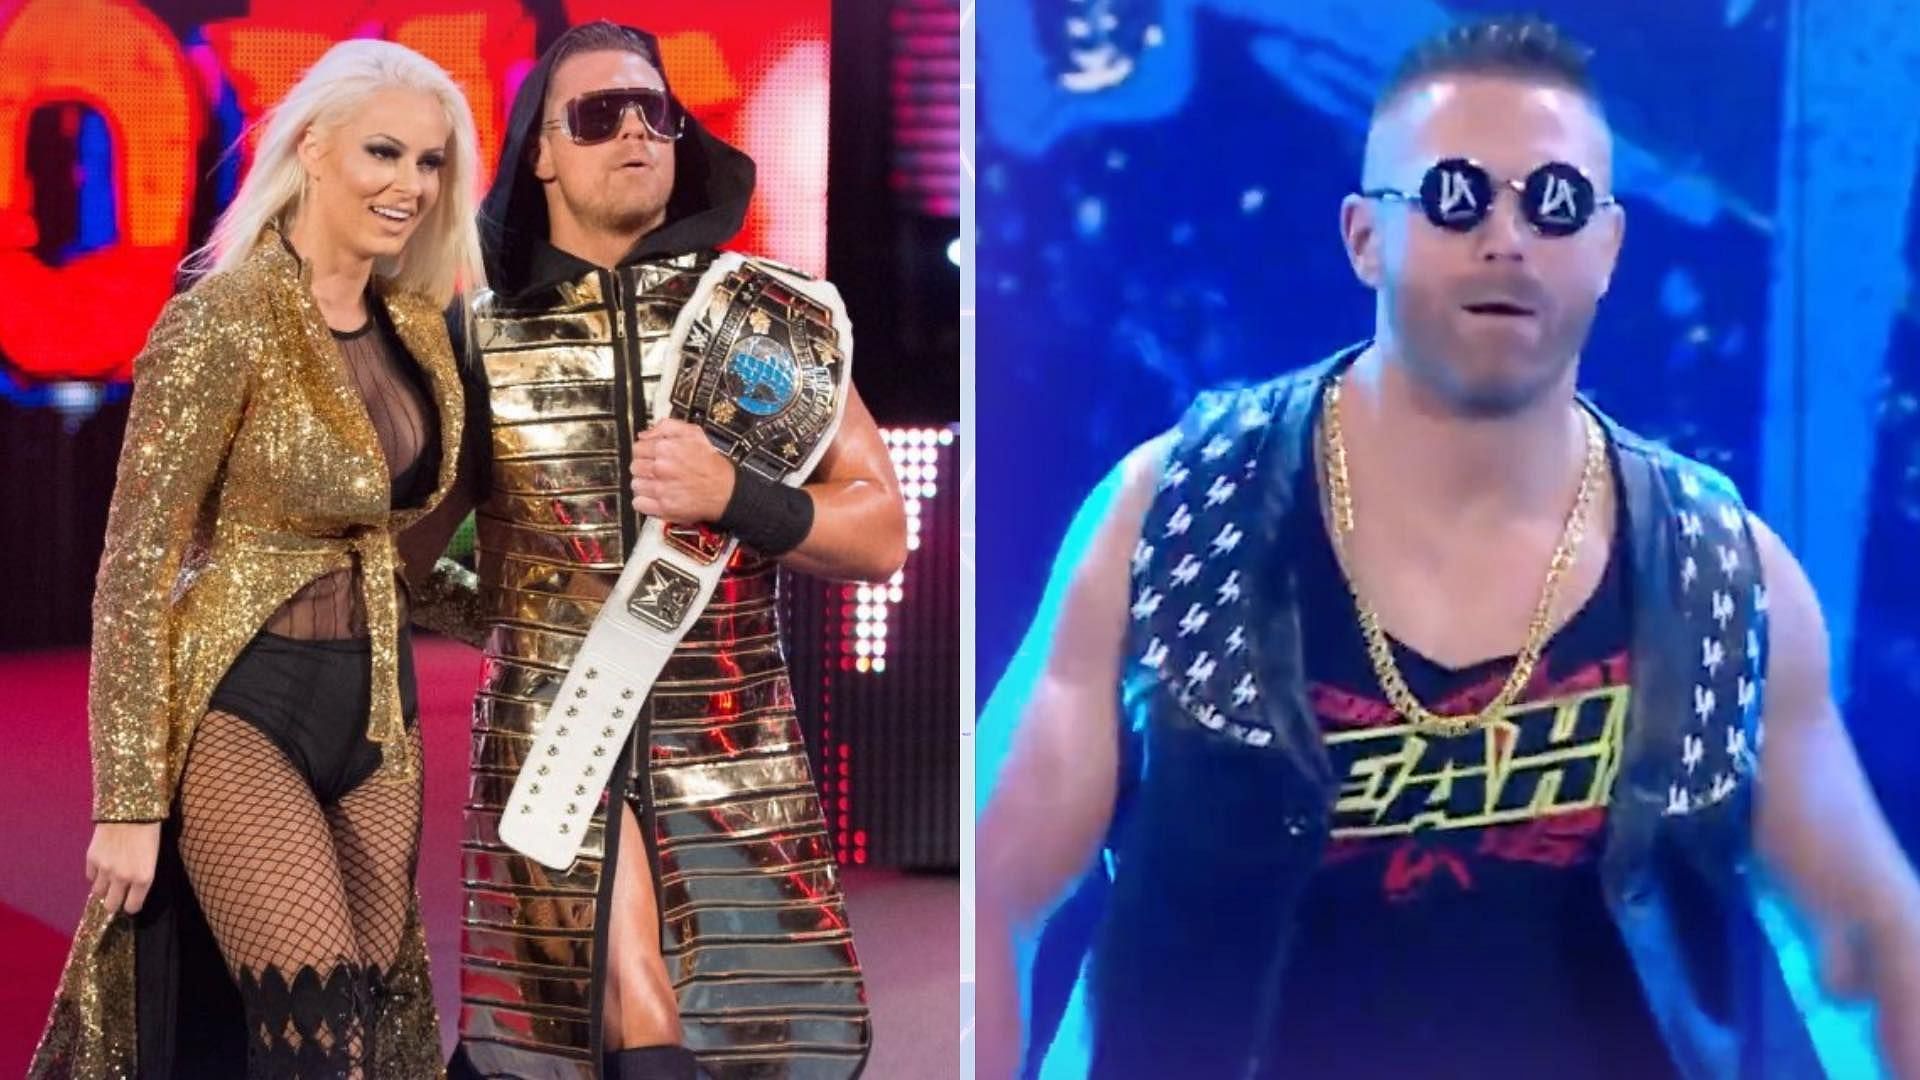 The Miz is set to face LA Knight at WWE Payback